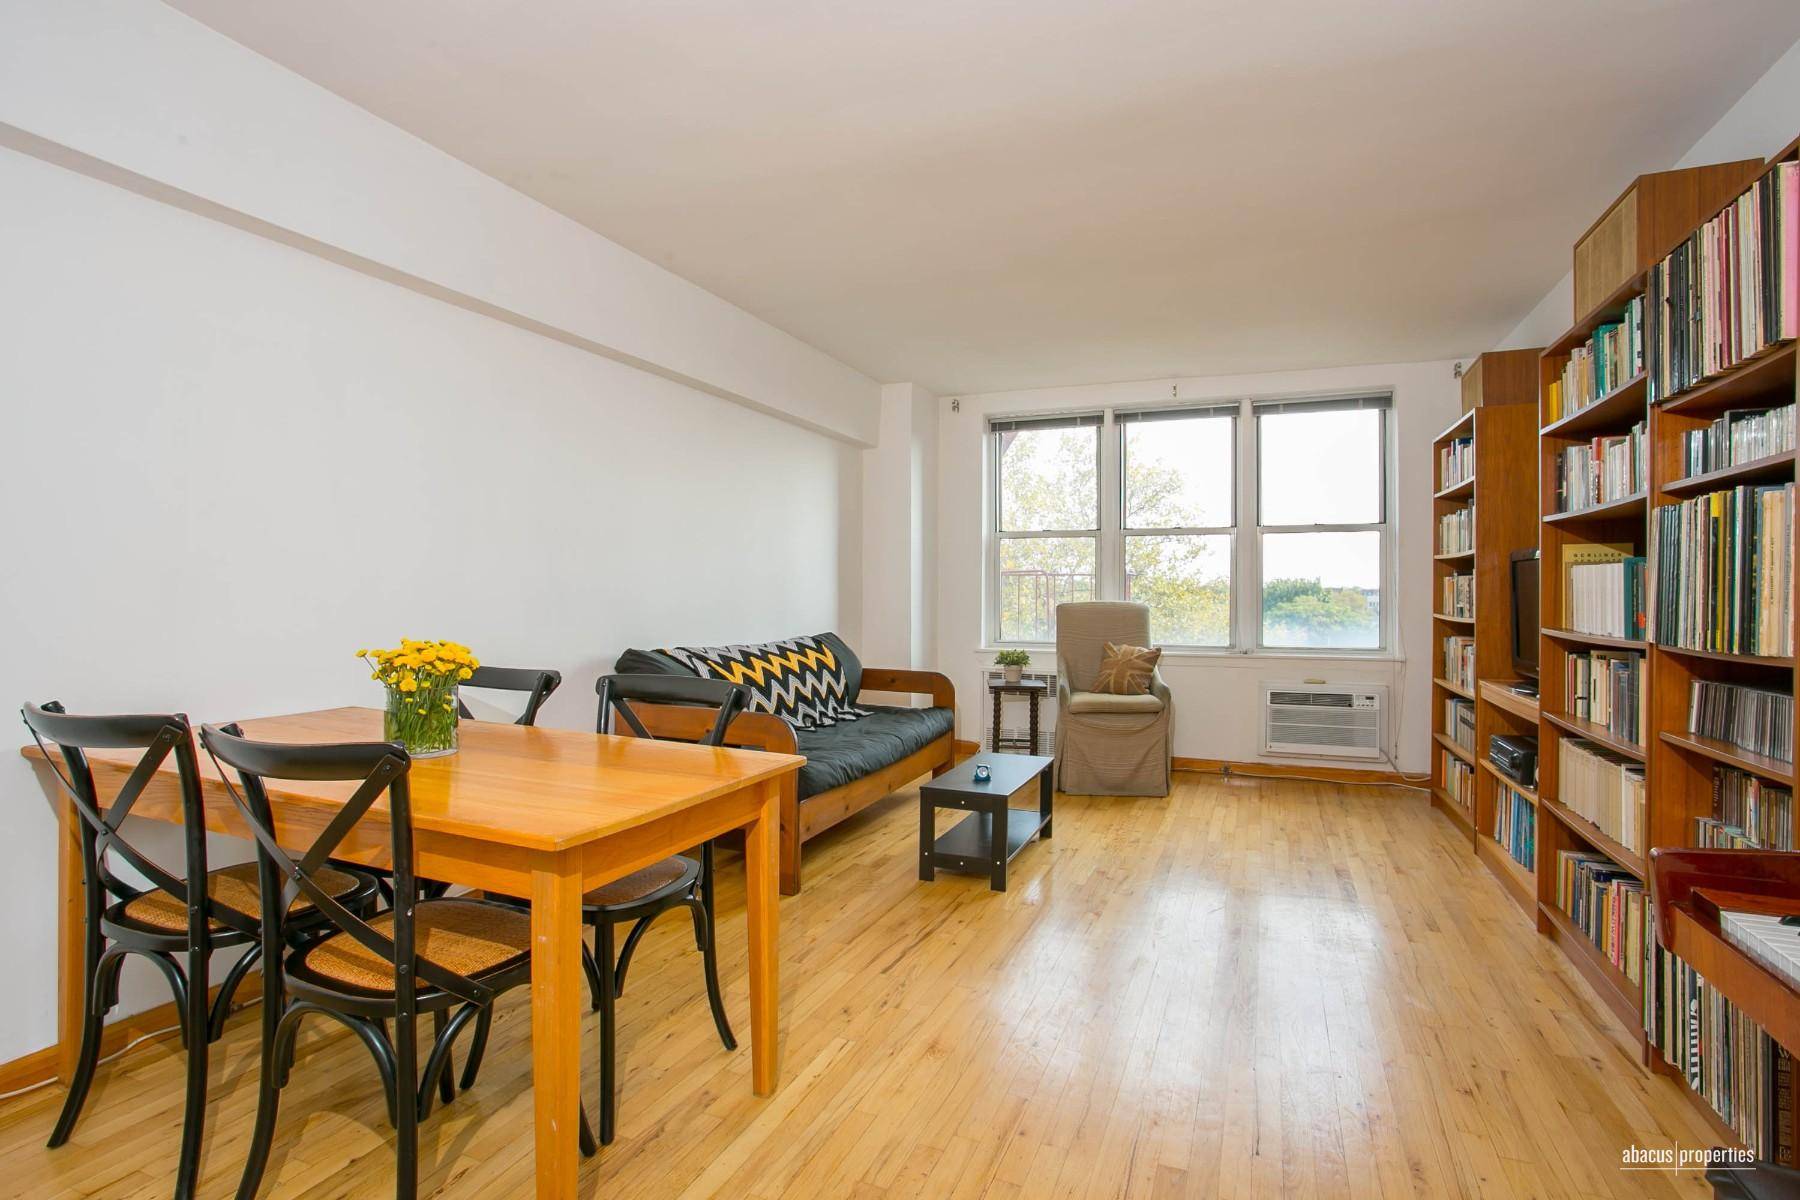 Move In Ready ! This bright and sunny 1 bedroom is located on a high floor with great eastern exposures.